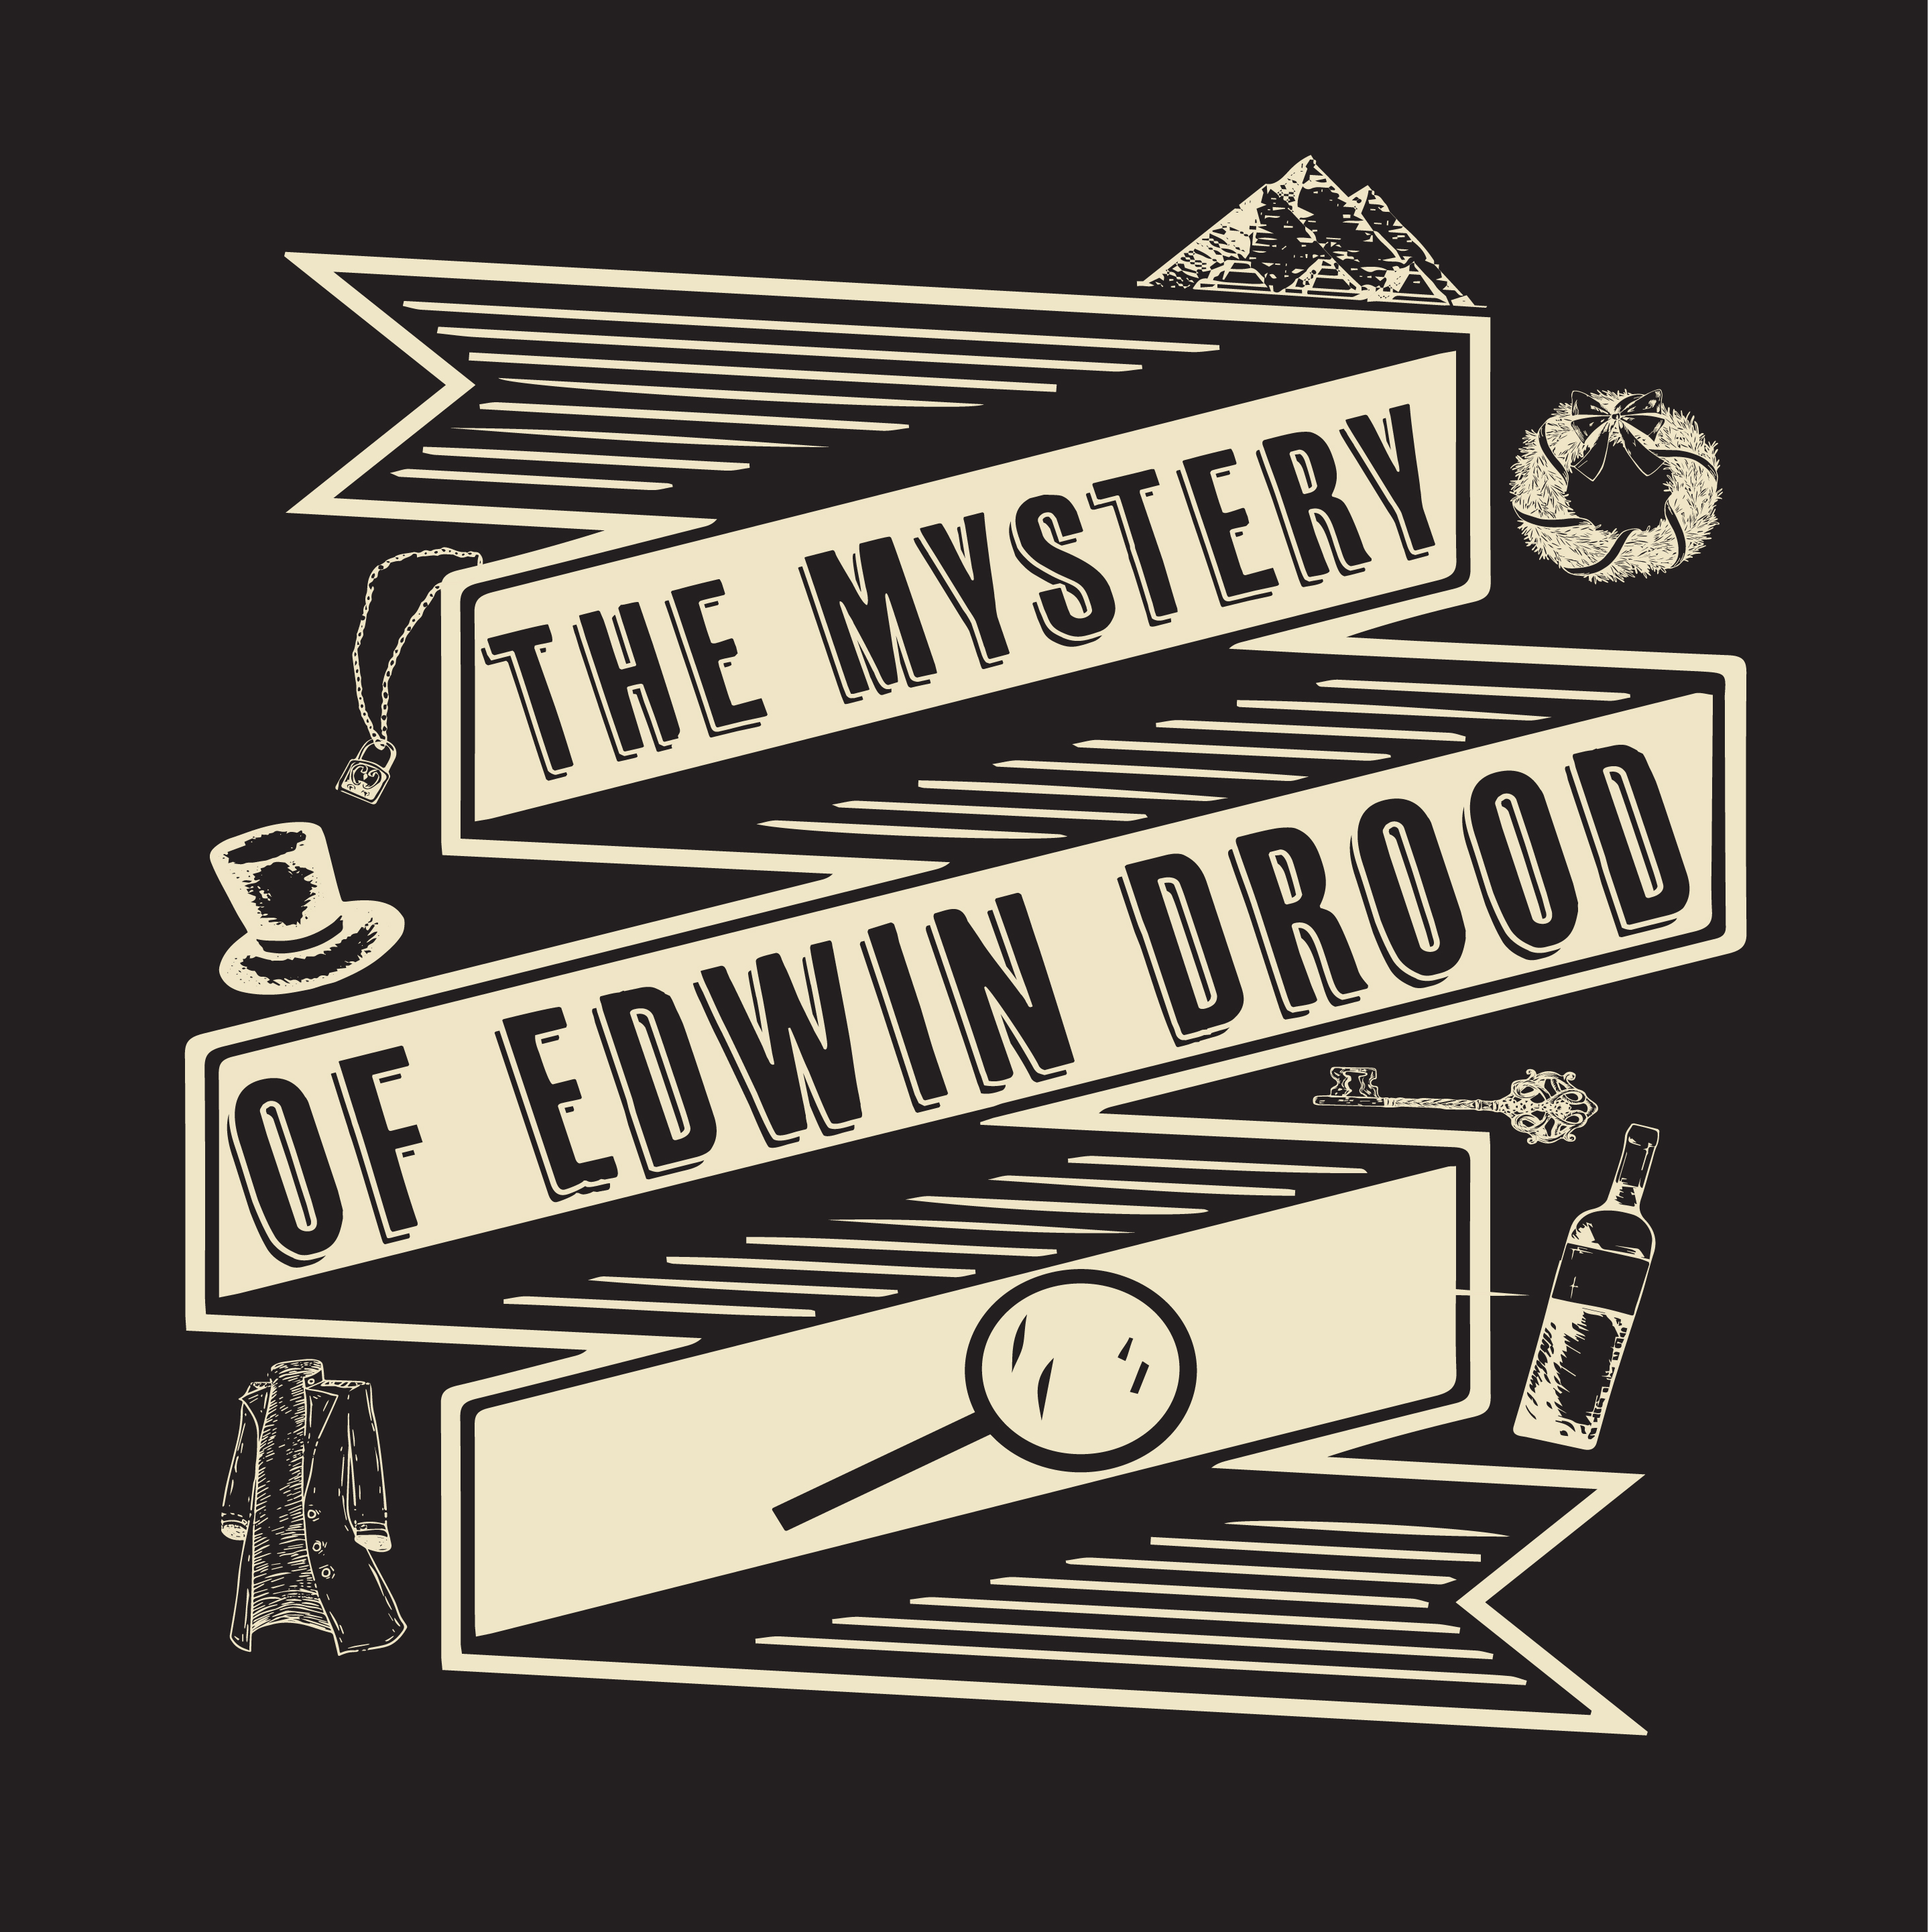 Are you able to add this picture to our Mystery of Edwin Drood listing? Thank you!